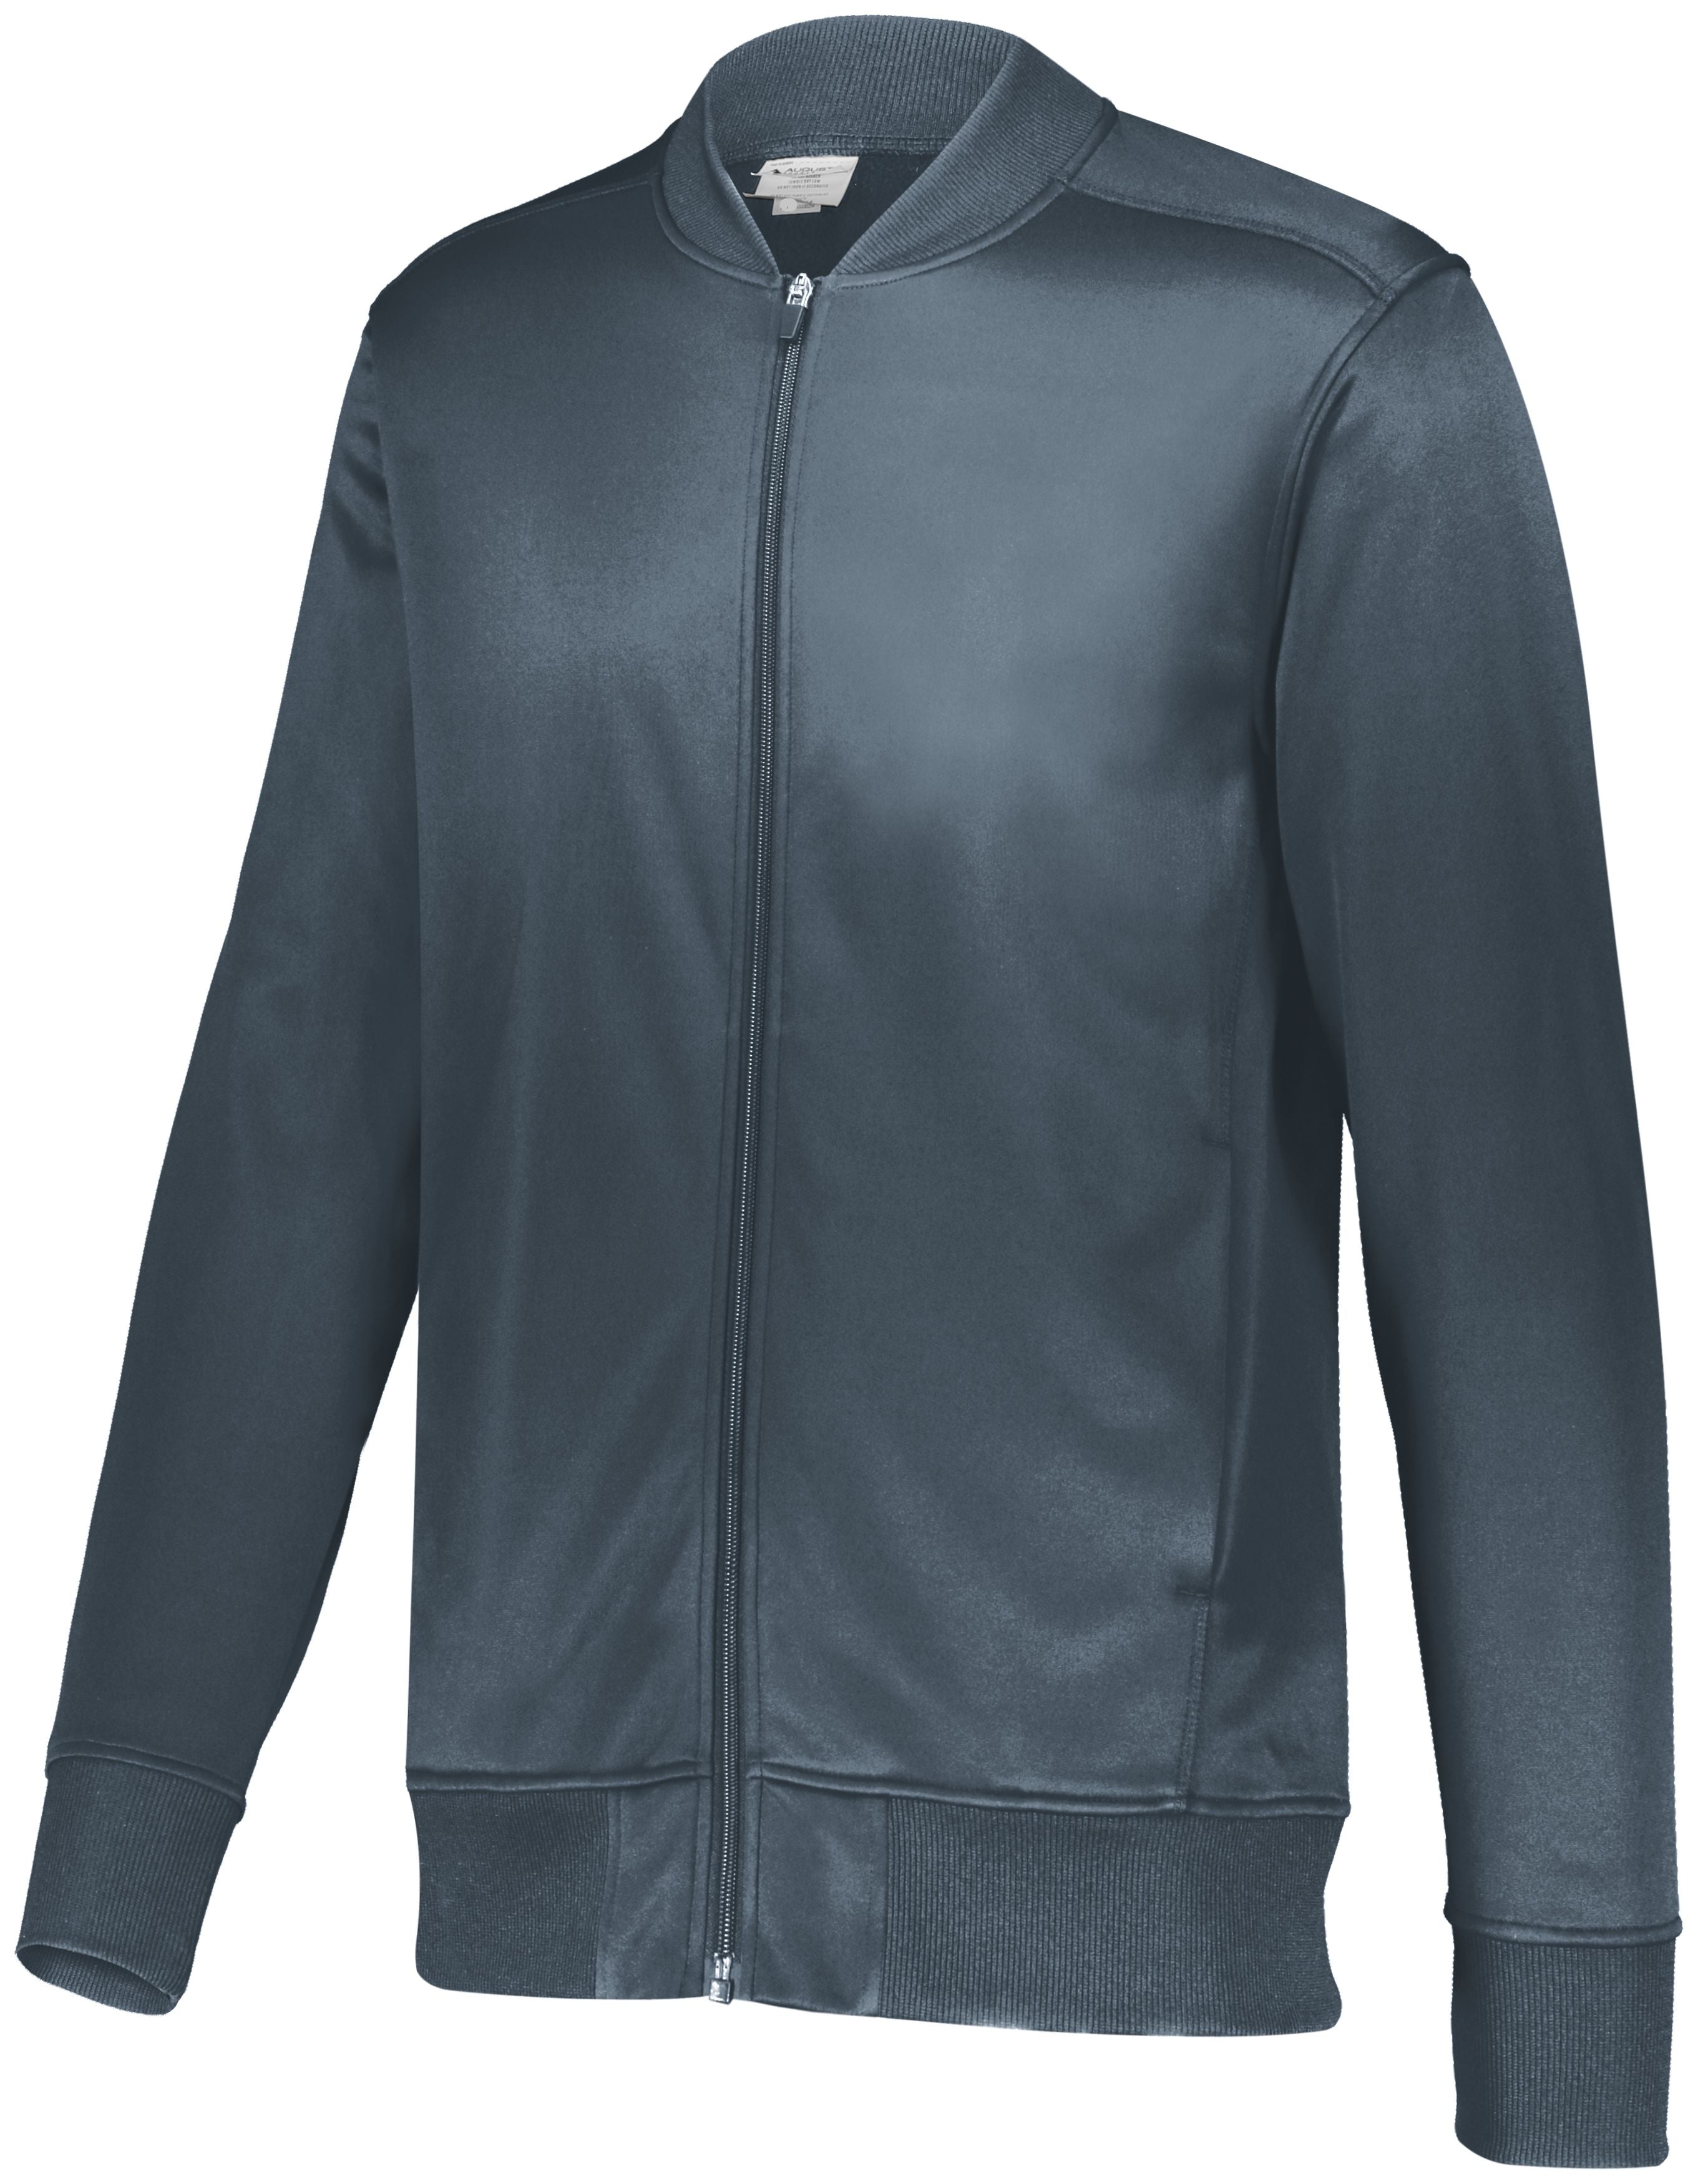 Augusta Sportswear Trainer Jacket in Graphite  -Part of the Adult, Adult-Jacket, Augusta-Products, Outerwear product lines at KanaleyCreations.com